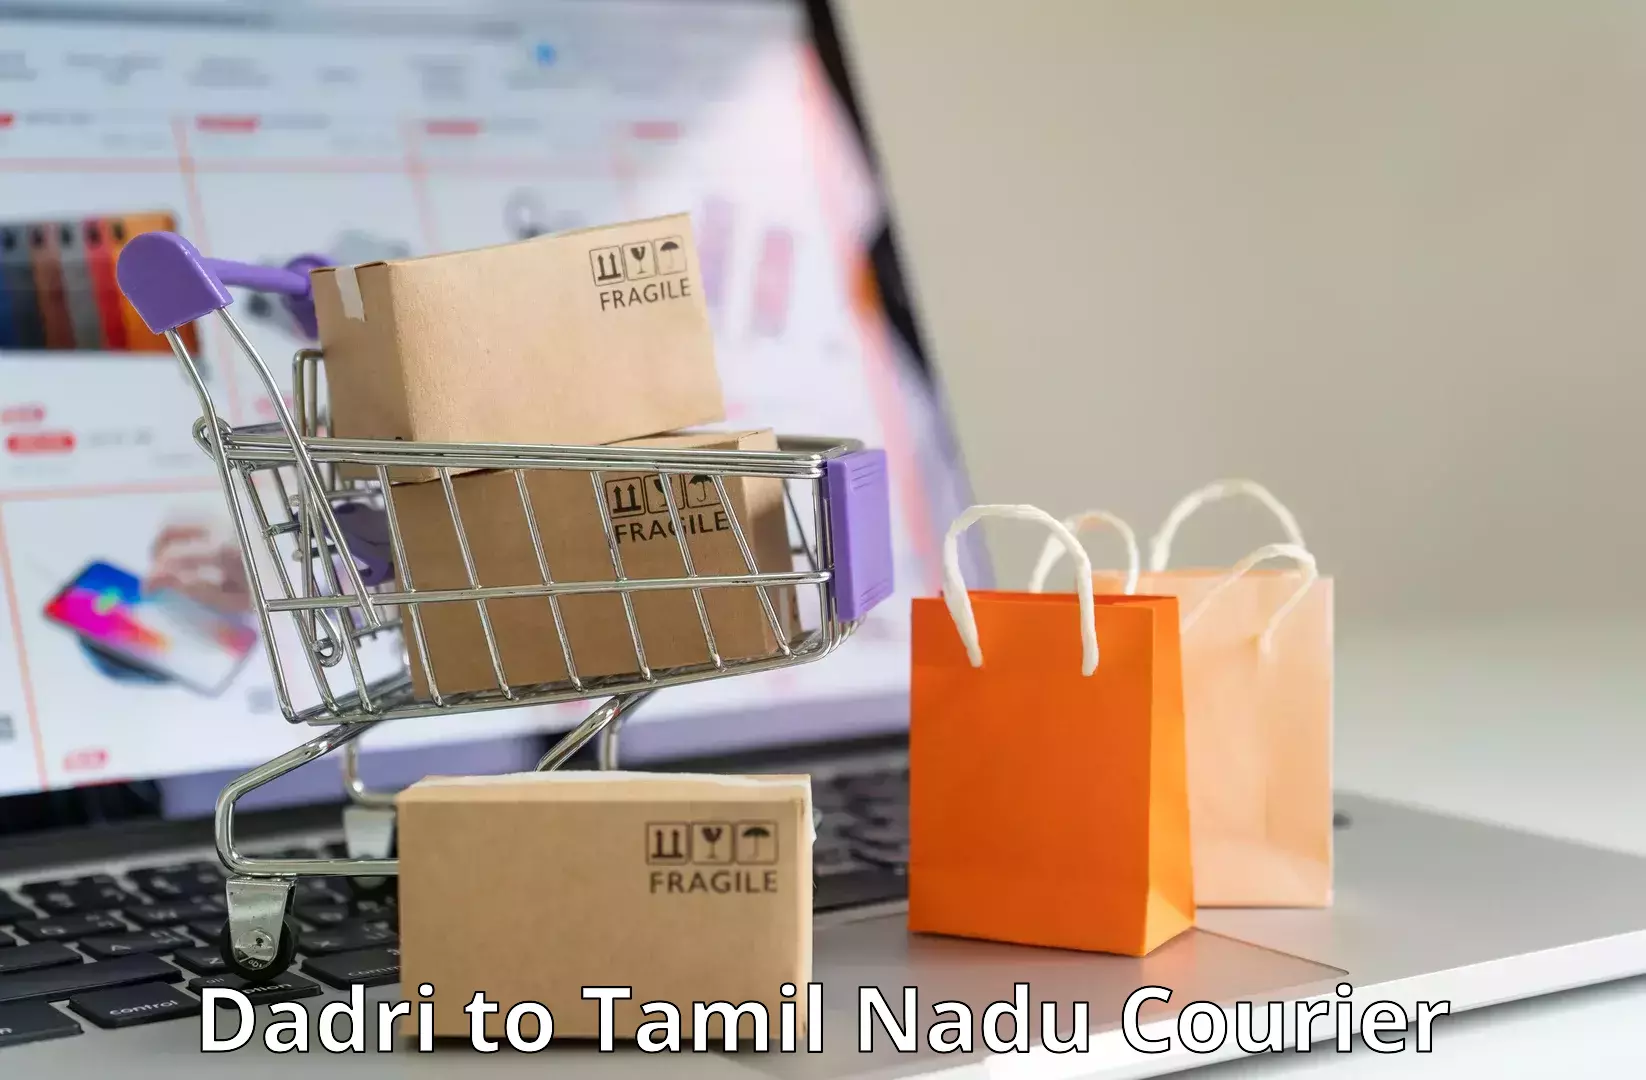 Personalized courier solutions Dadri to Tamil Nadu